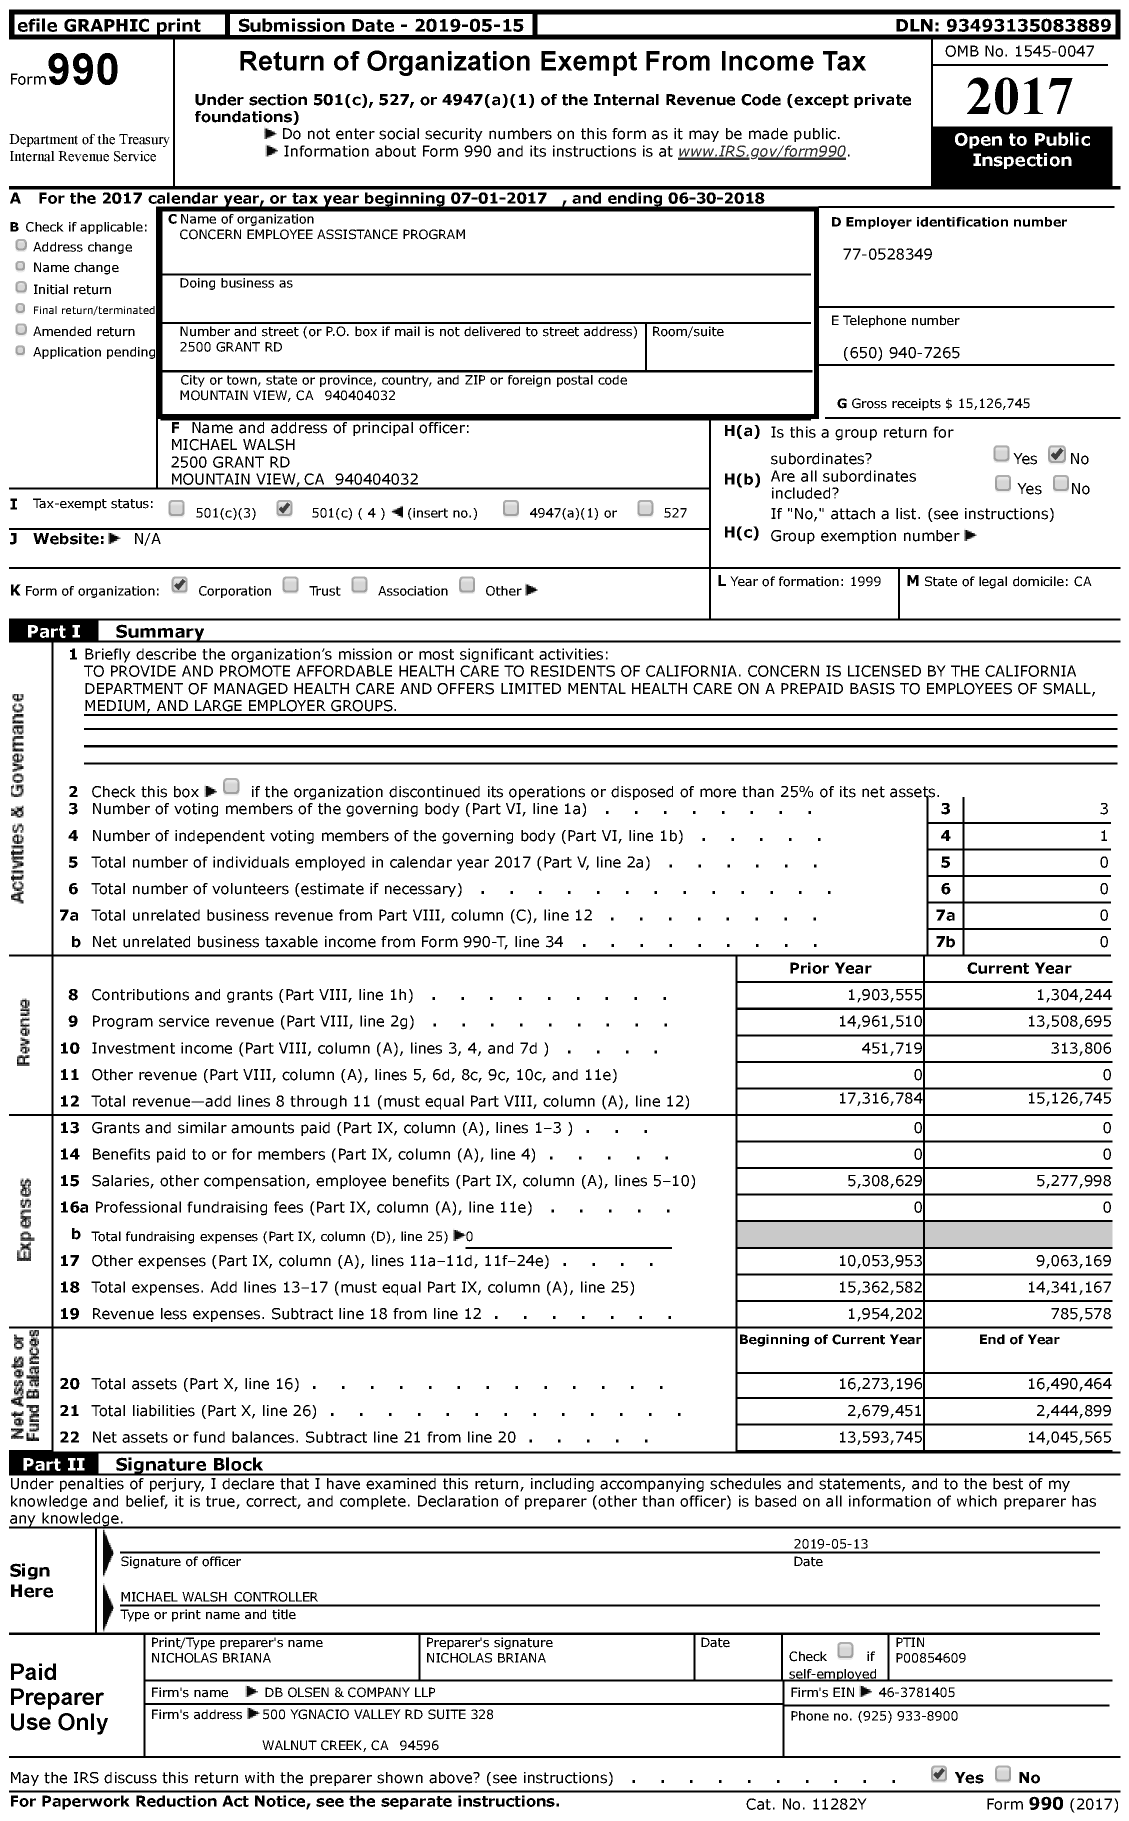 Image of first page of 2017 Form 990 for Concern Employee Assistance Program